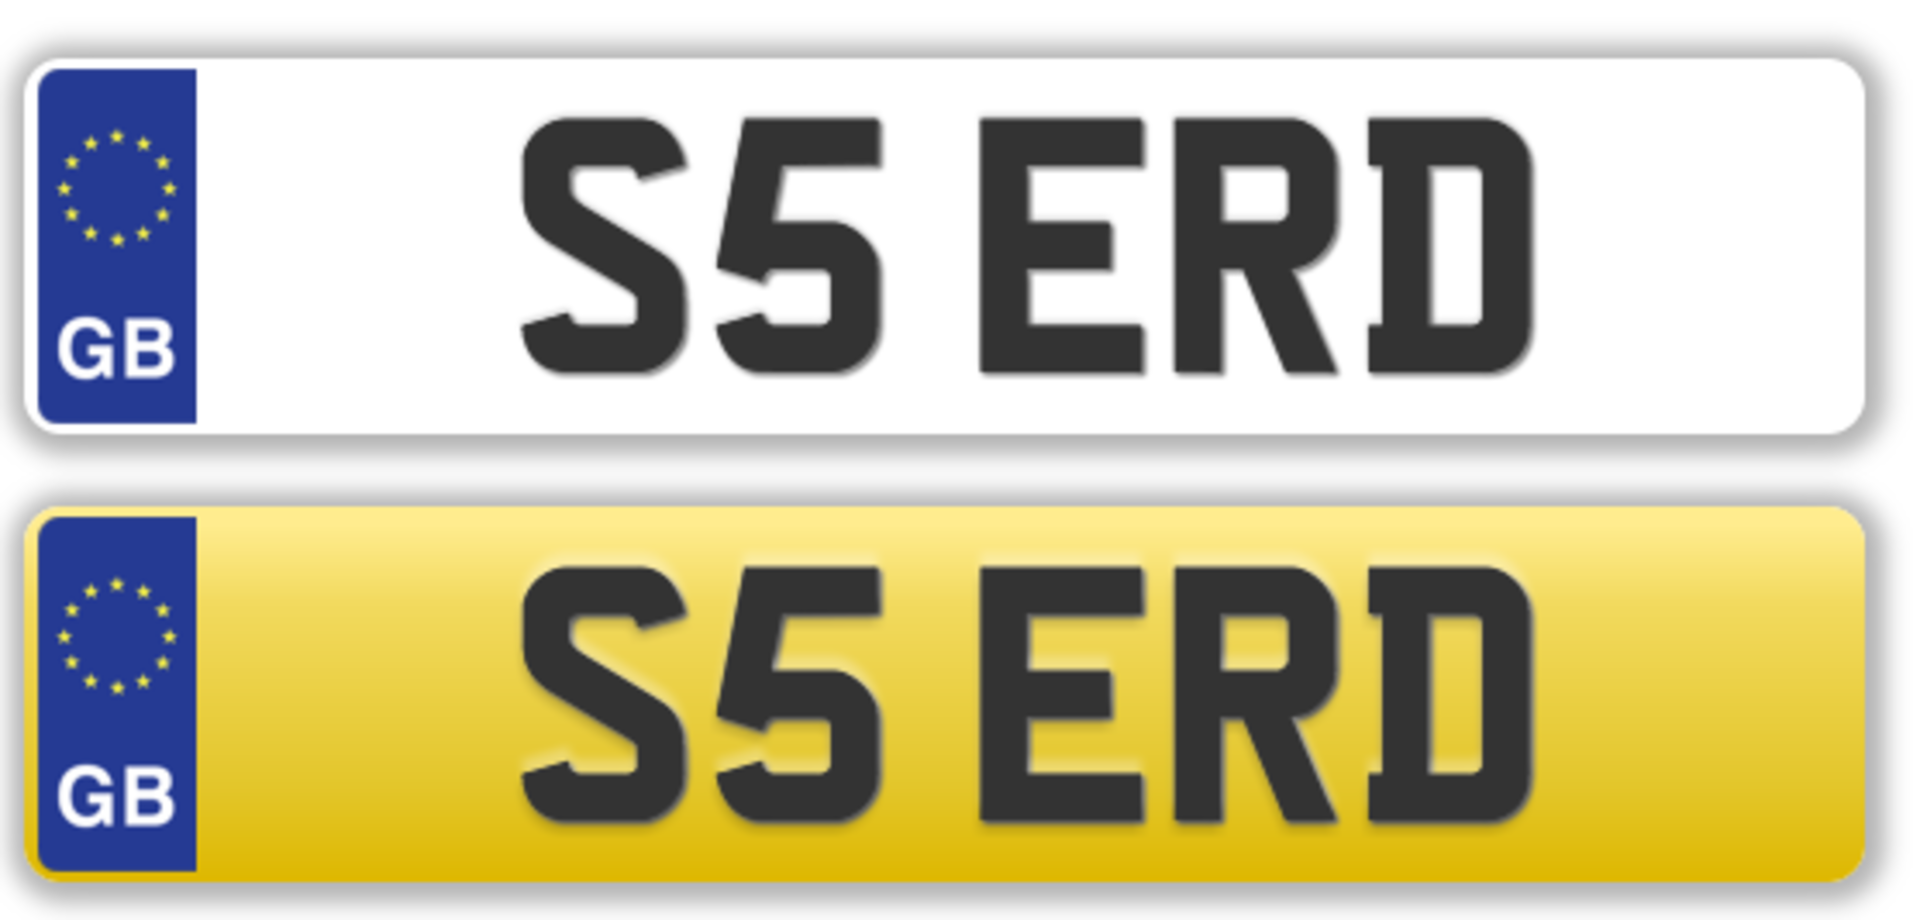 Cherished Plate - S5 ERD - No transfer fees. All registrations on retention and ready to transfer.